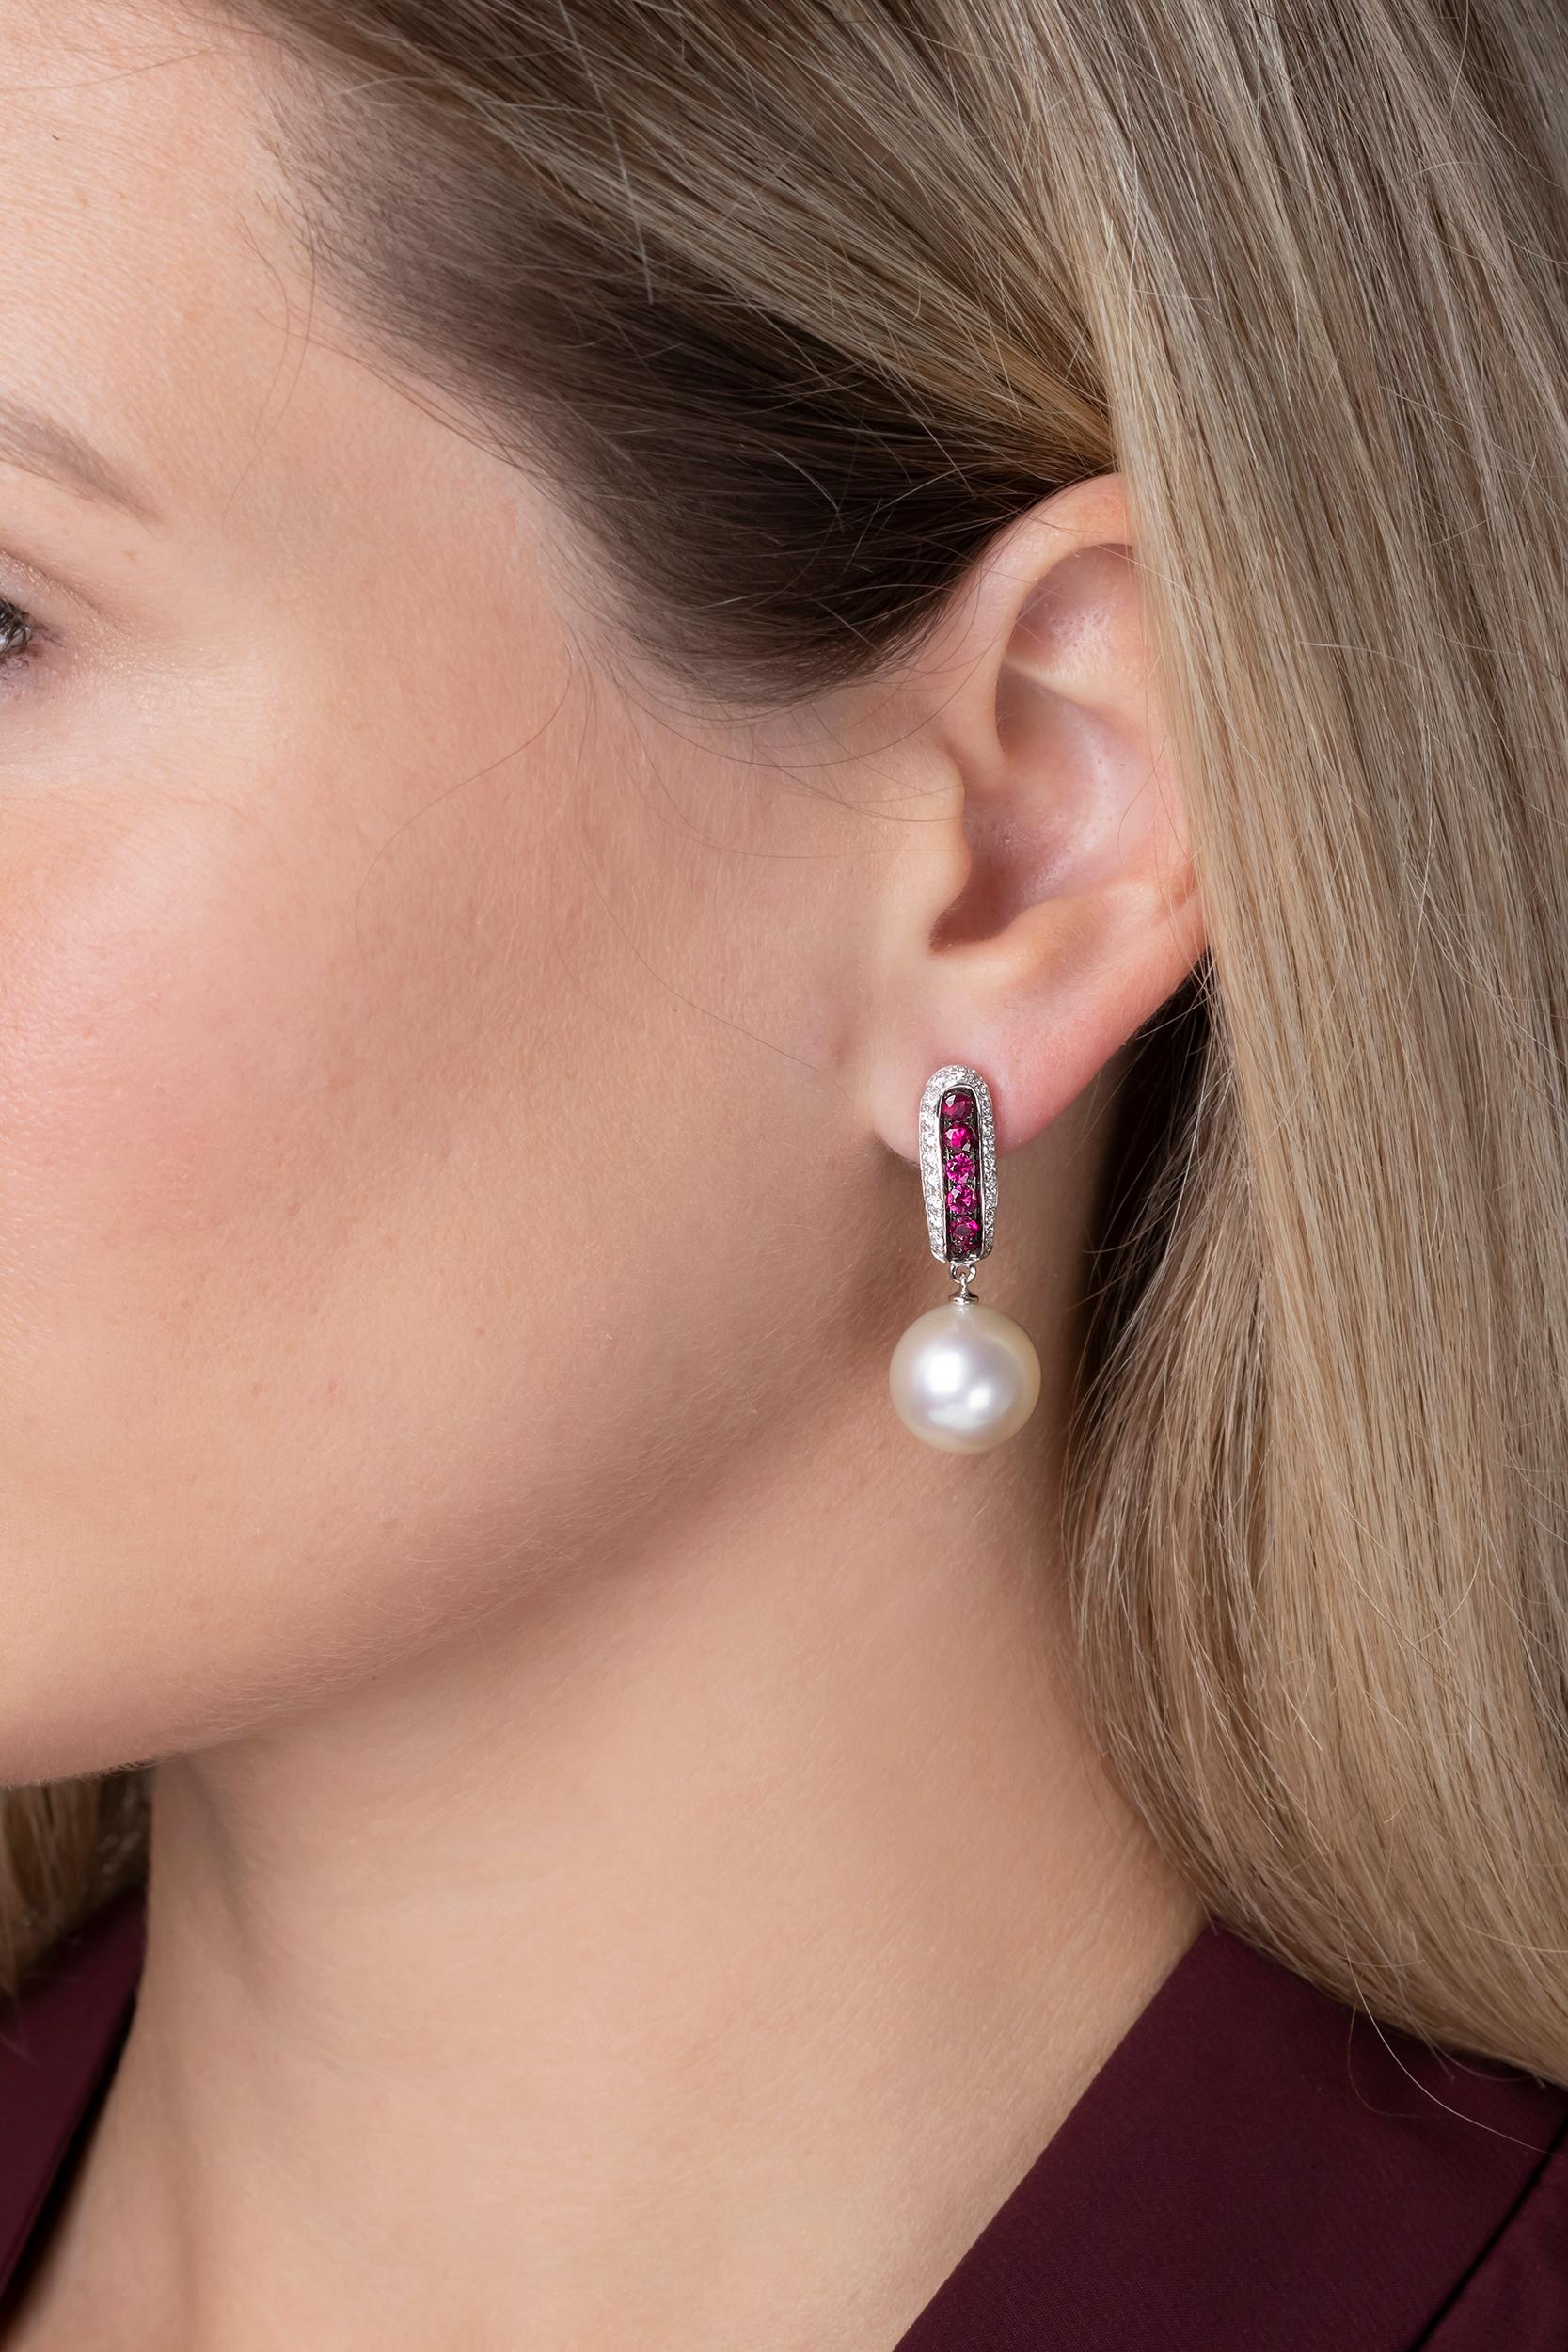 These elegant earrings by Yoko London feature lustrous South Sea pearls beneath a striking combination of rubies and diamonds. Designed to offer a unique allure, these spectacular earrings have been hand-finished in London to the highest standard.